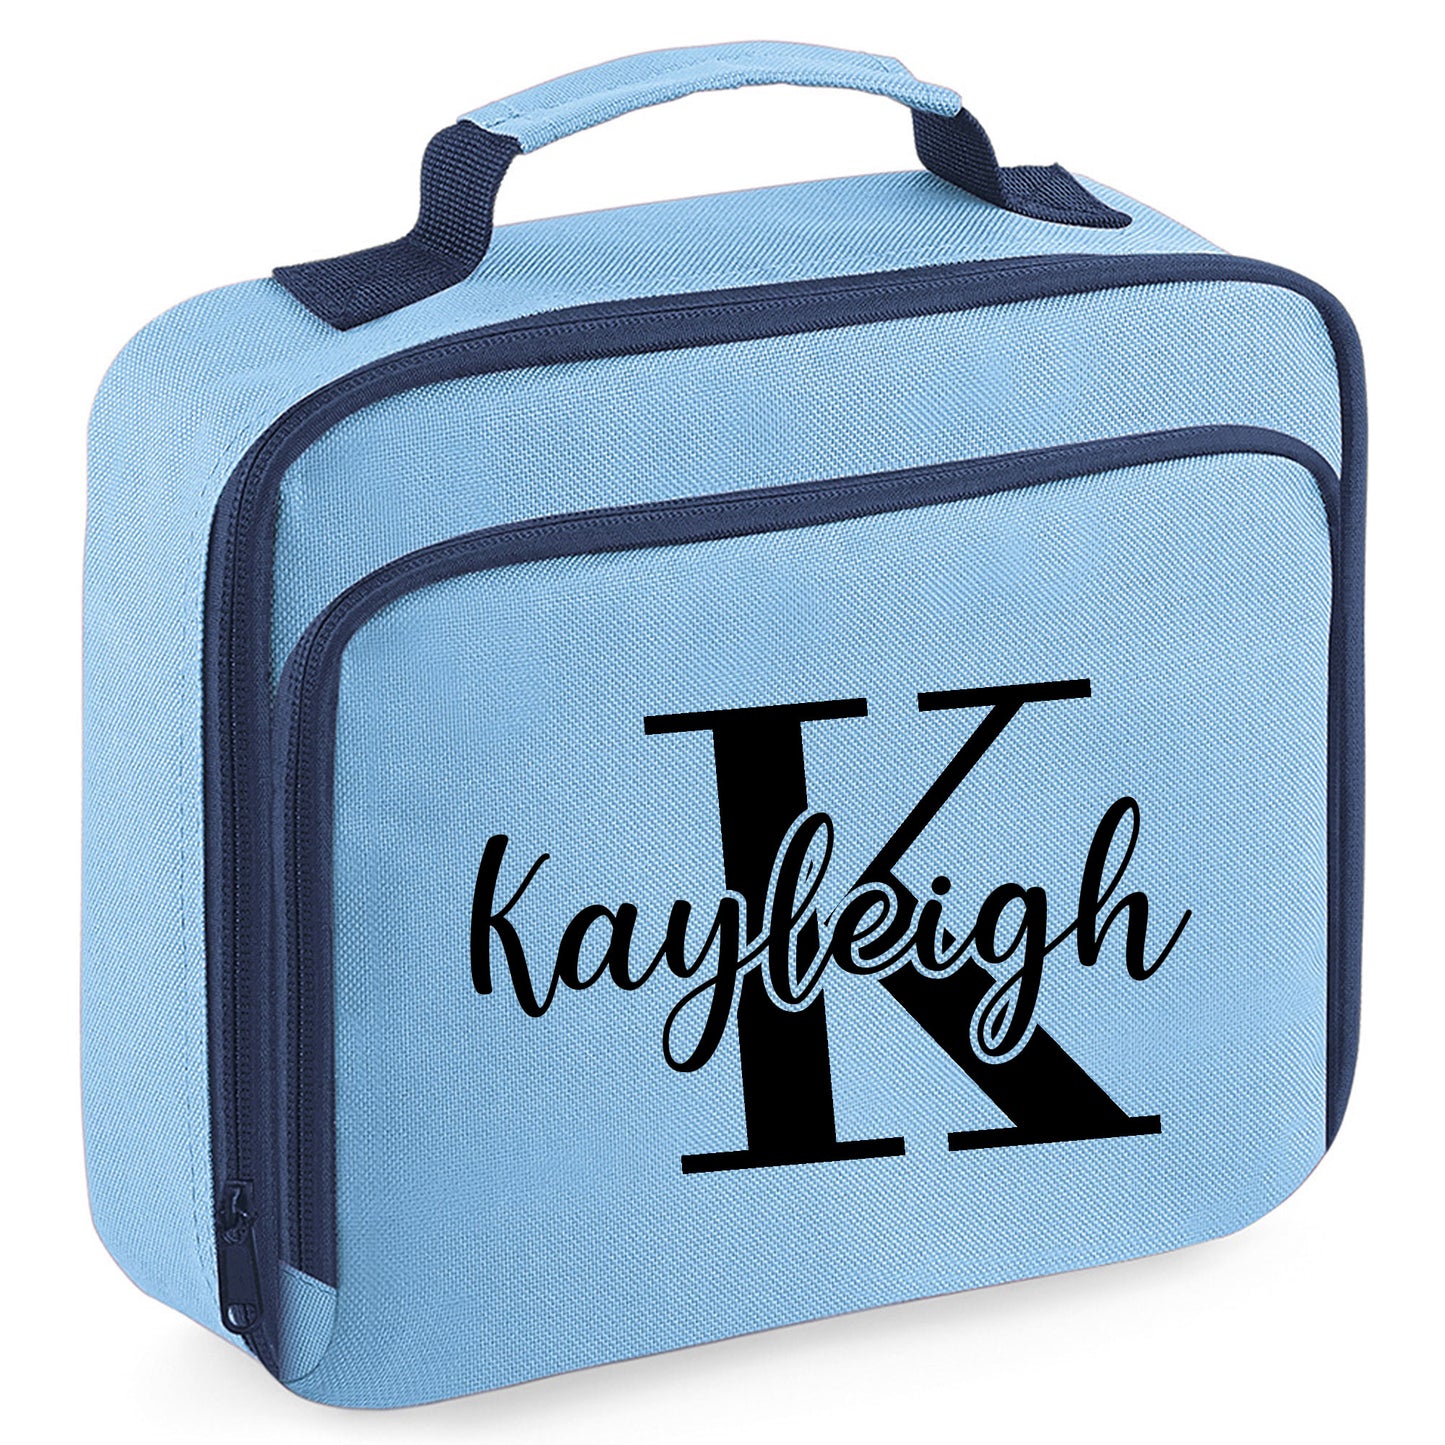 Personalised Lunch Bag with Name Childs School Lunch Box  - Always Looking Good - Blue  